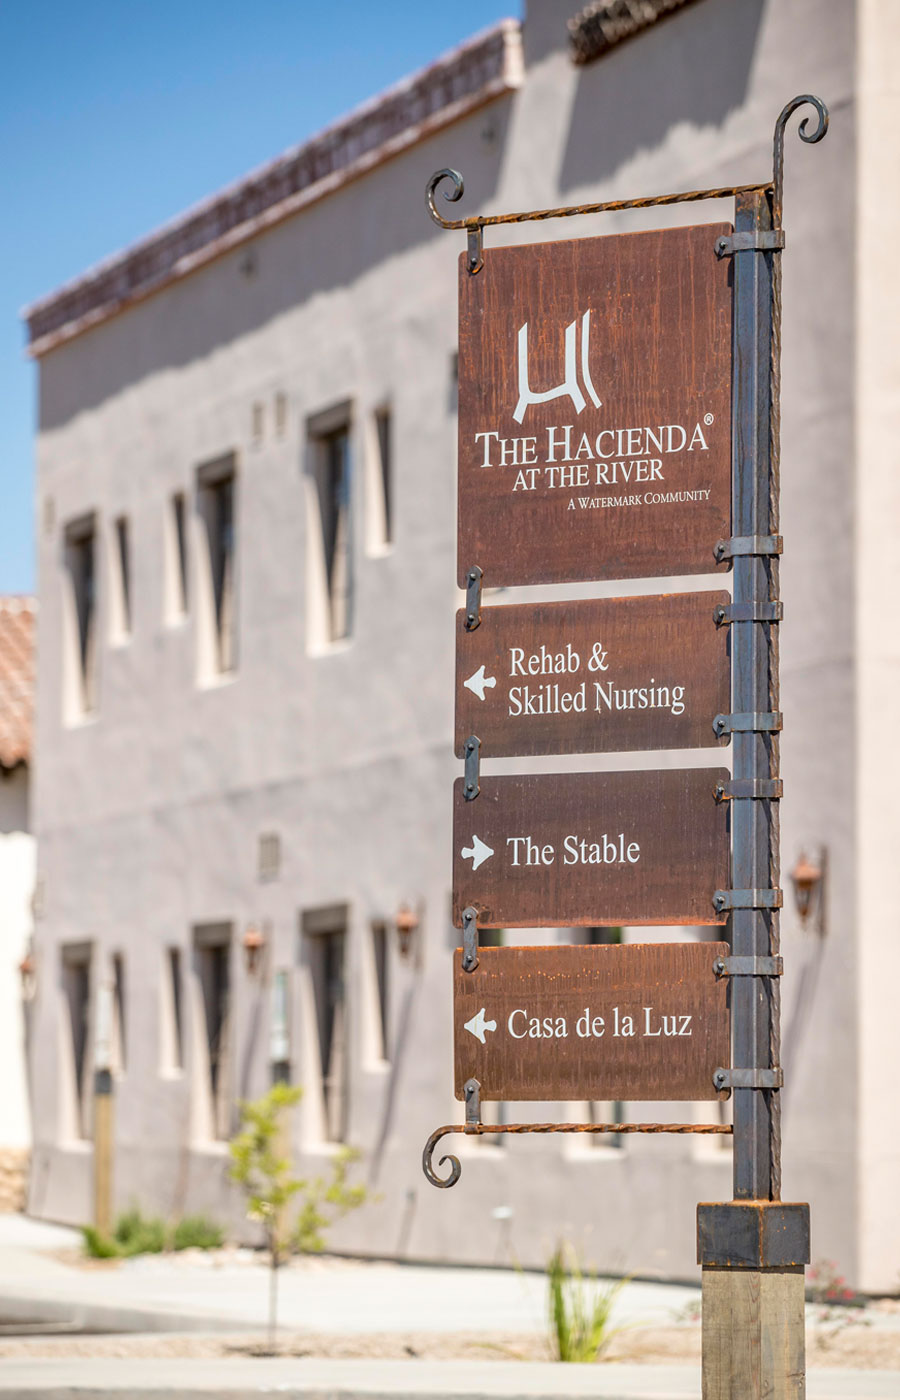 The Hacienda at the River exterior building and courtyard signage.